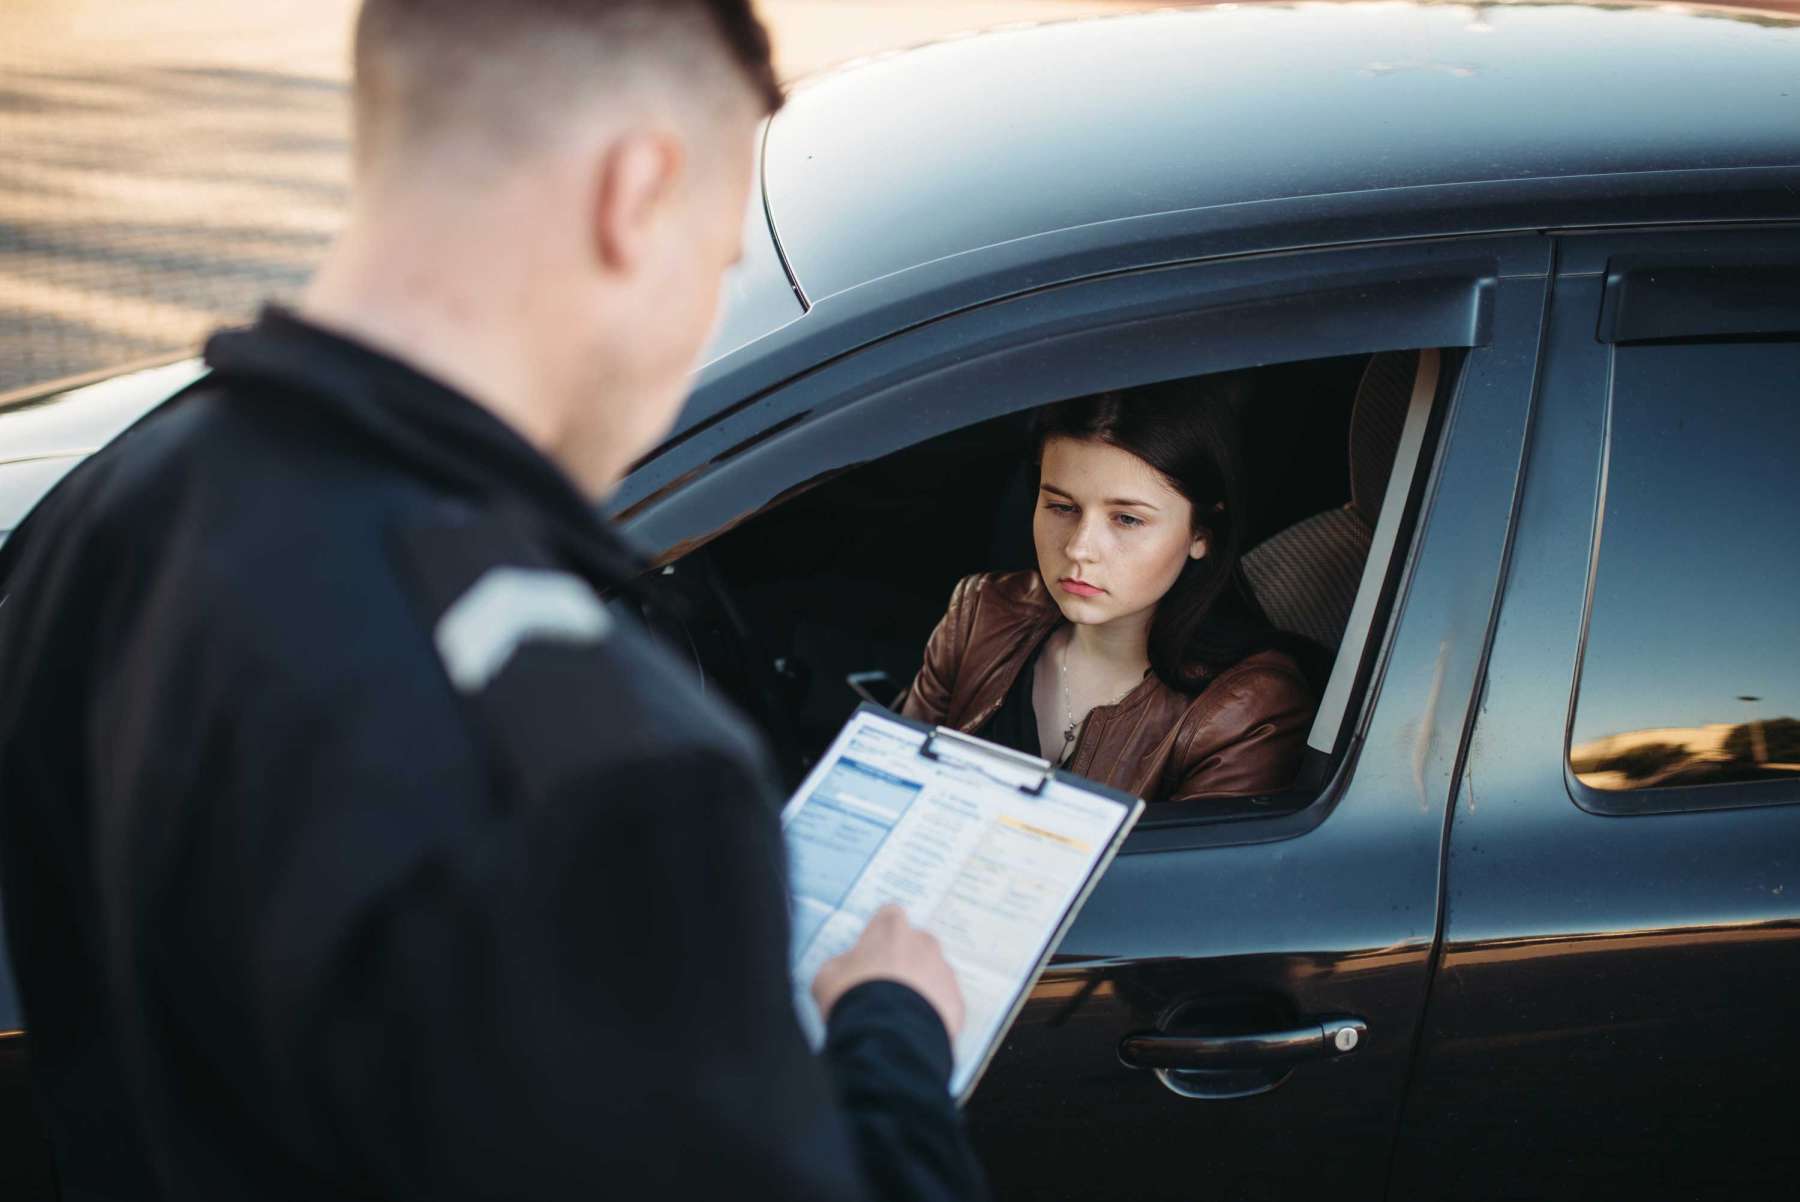 Rhode Island News: Fight Back: Beating a traffic ticket starts as soon as you are pulled over